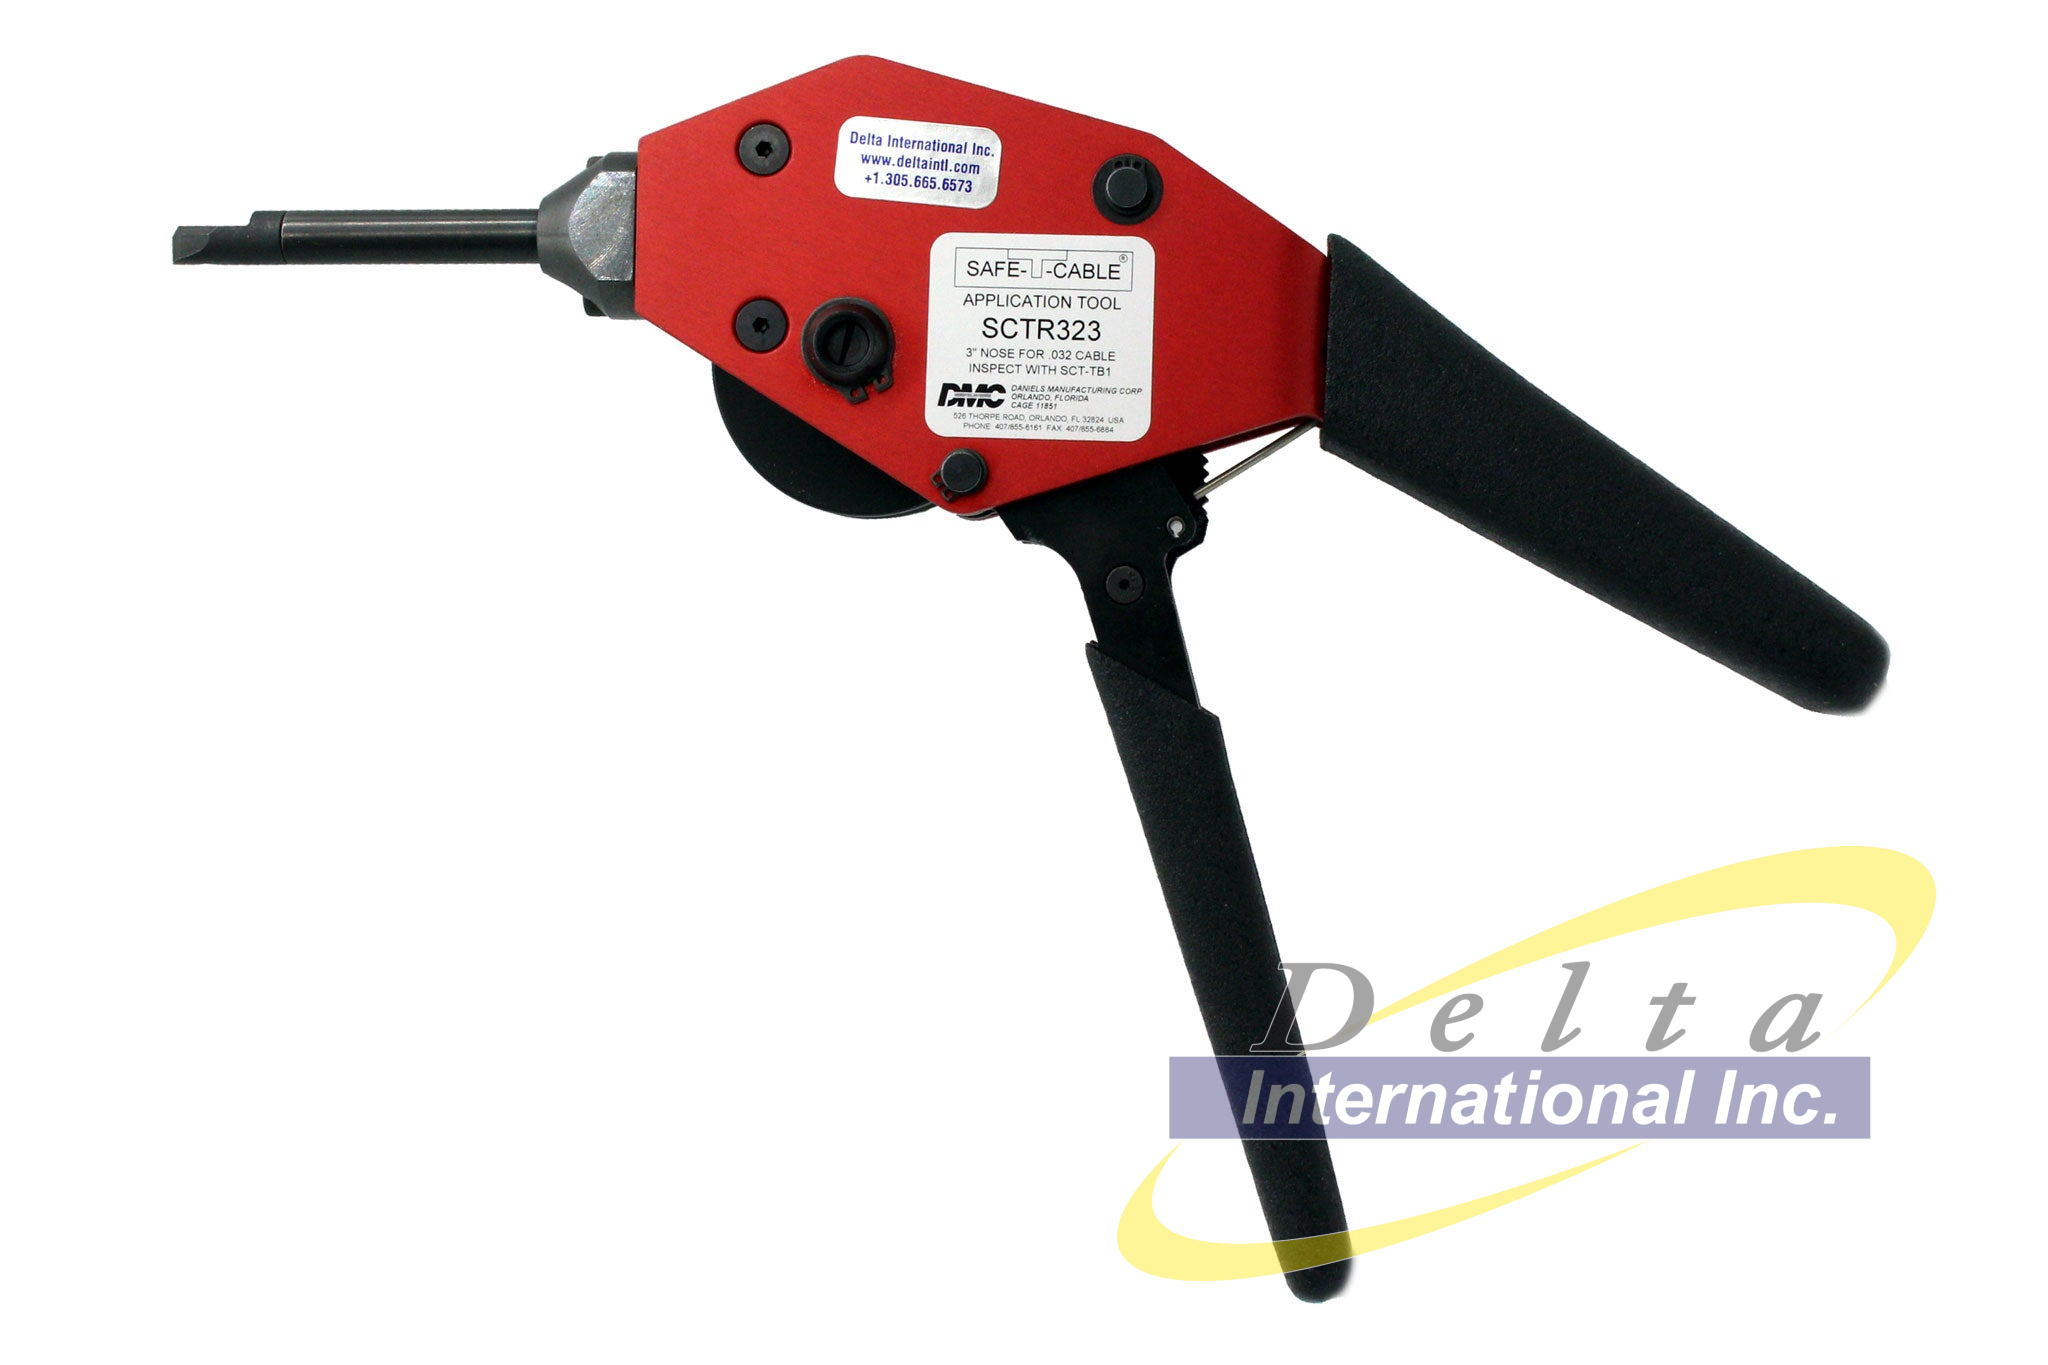 DMC SCTR323 - Adjustable Tension, Safe-T-Cable Application Tool wit...